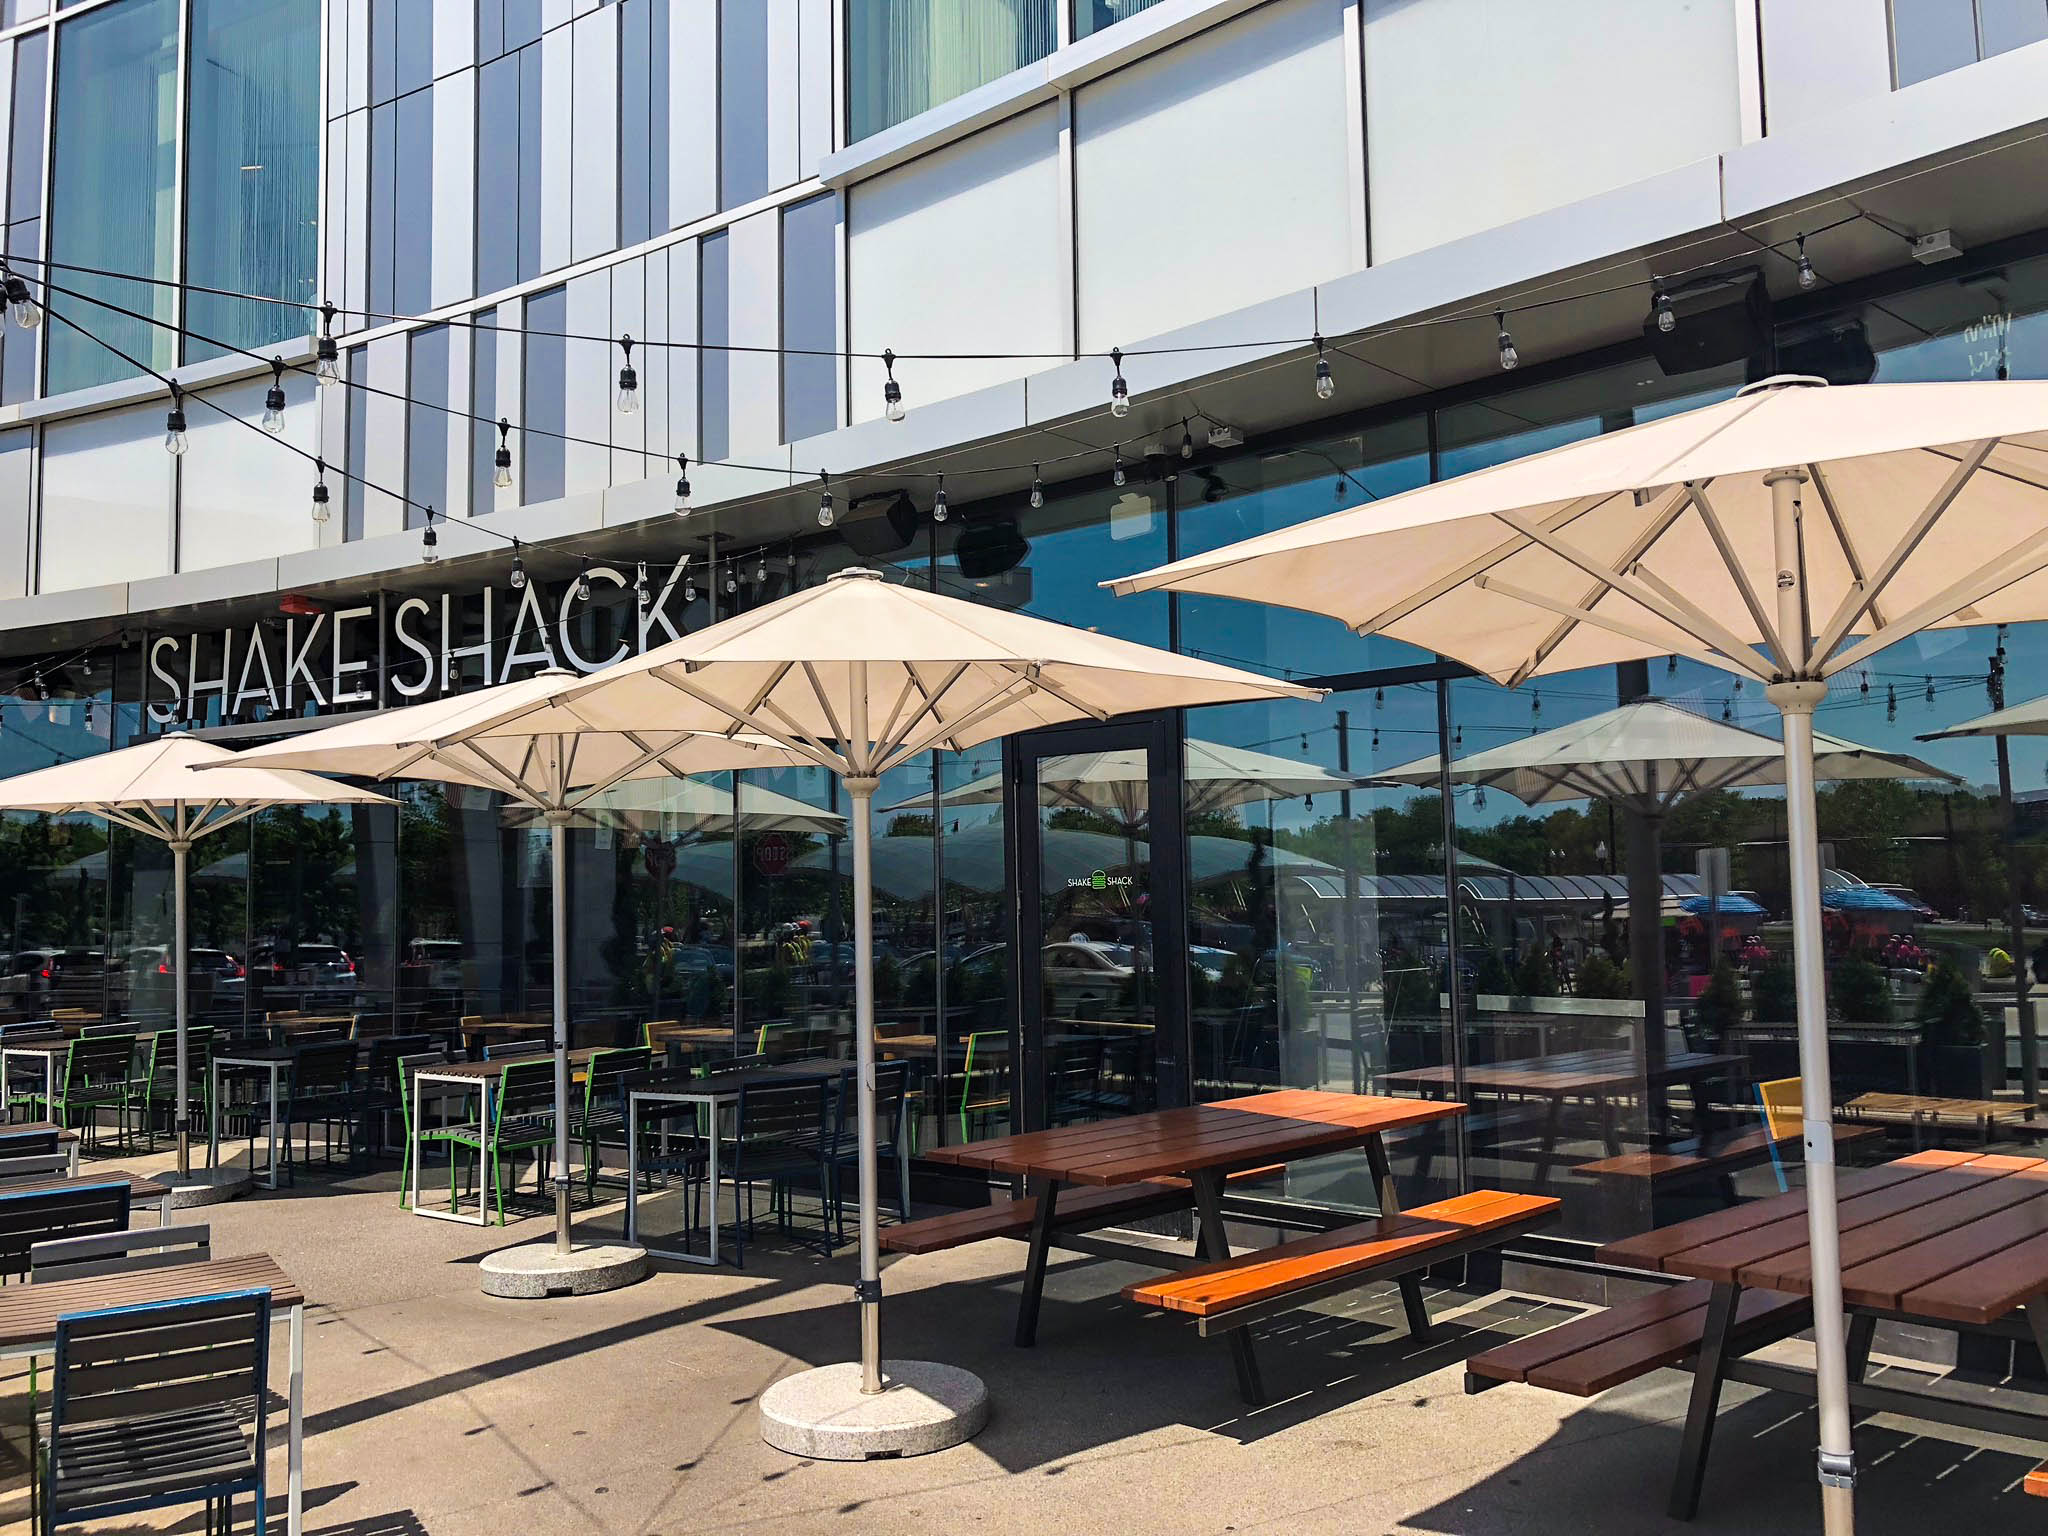 Shake Shack - Pentagon City - Front of building with picnic tables